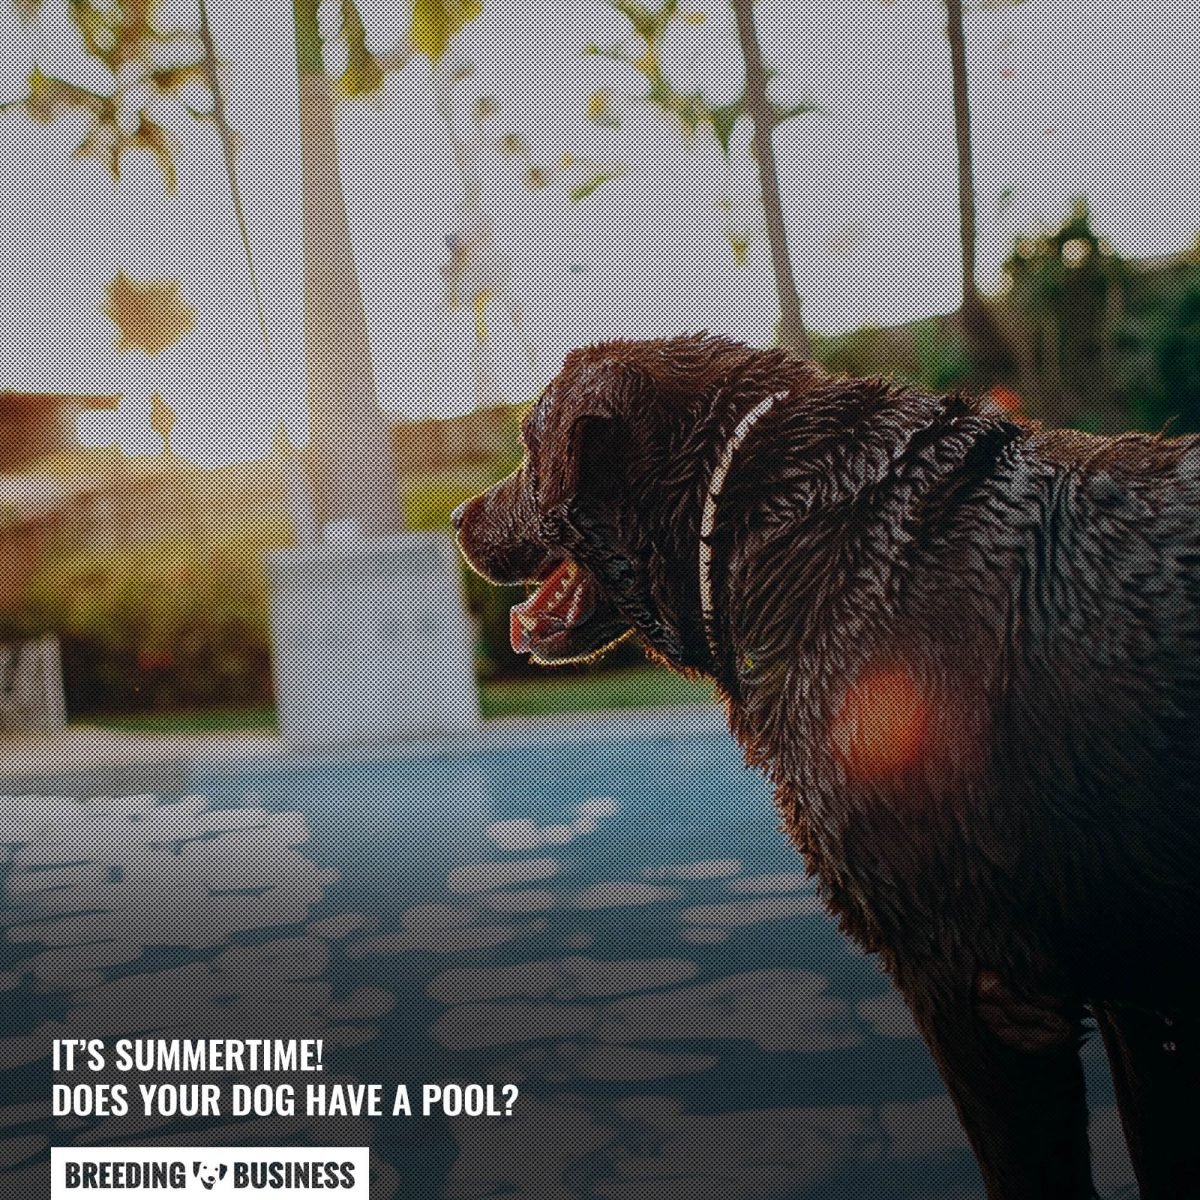 Does your dog have a pool?